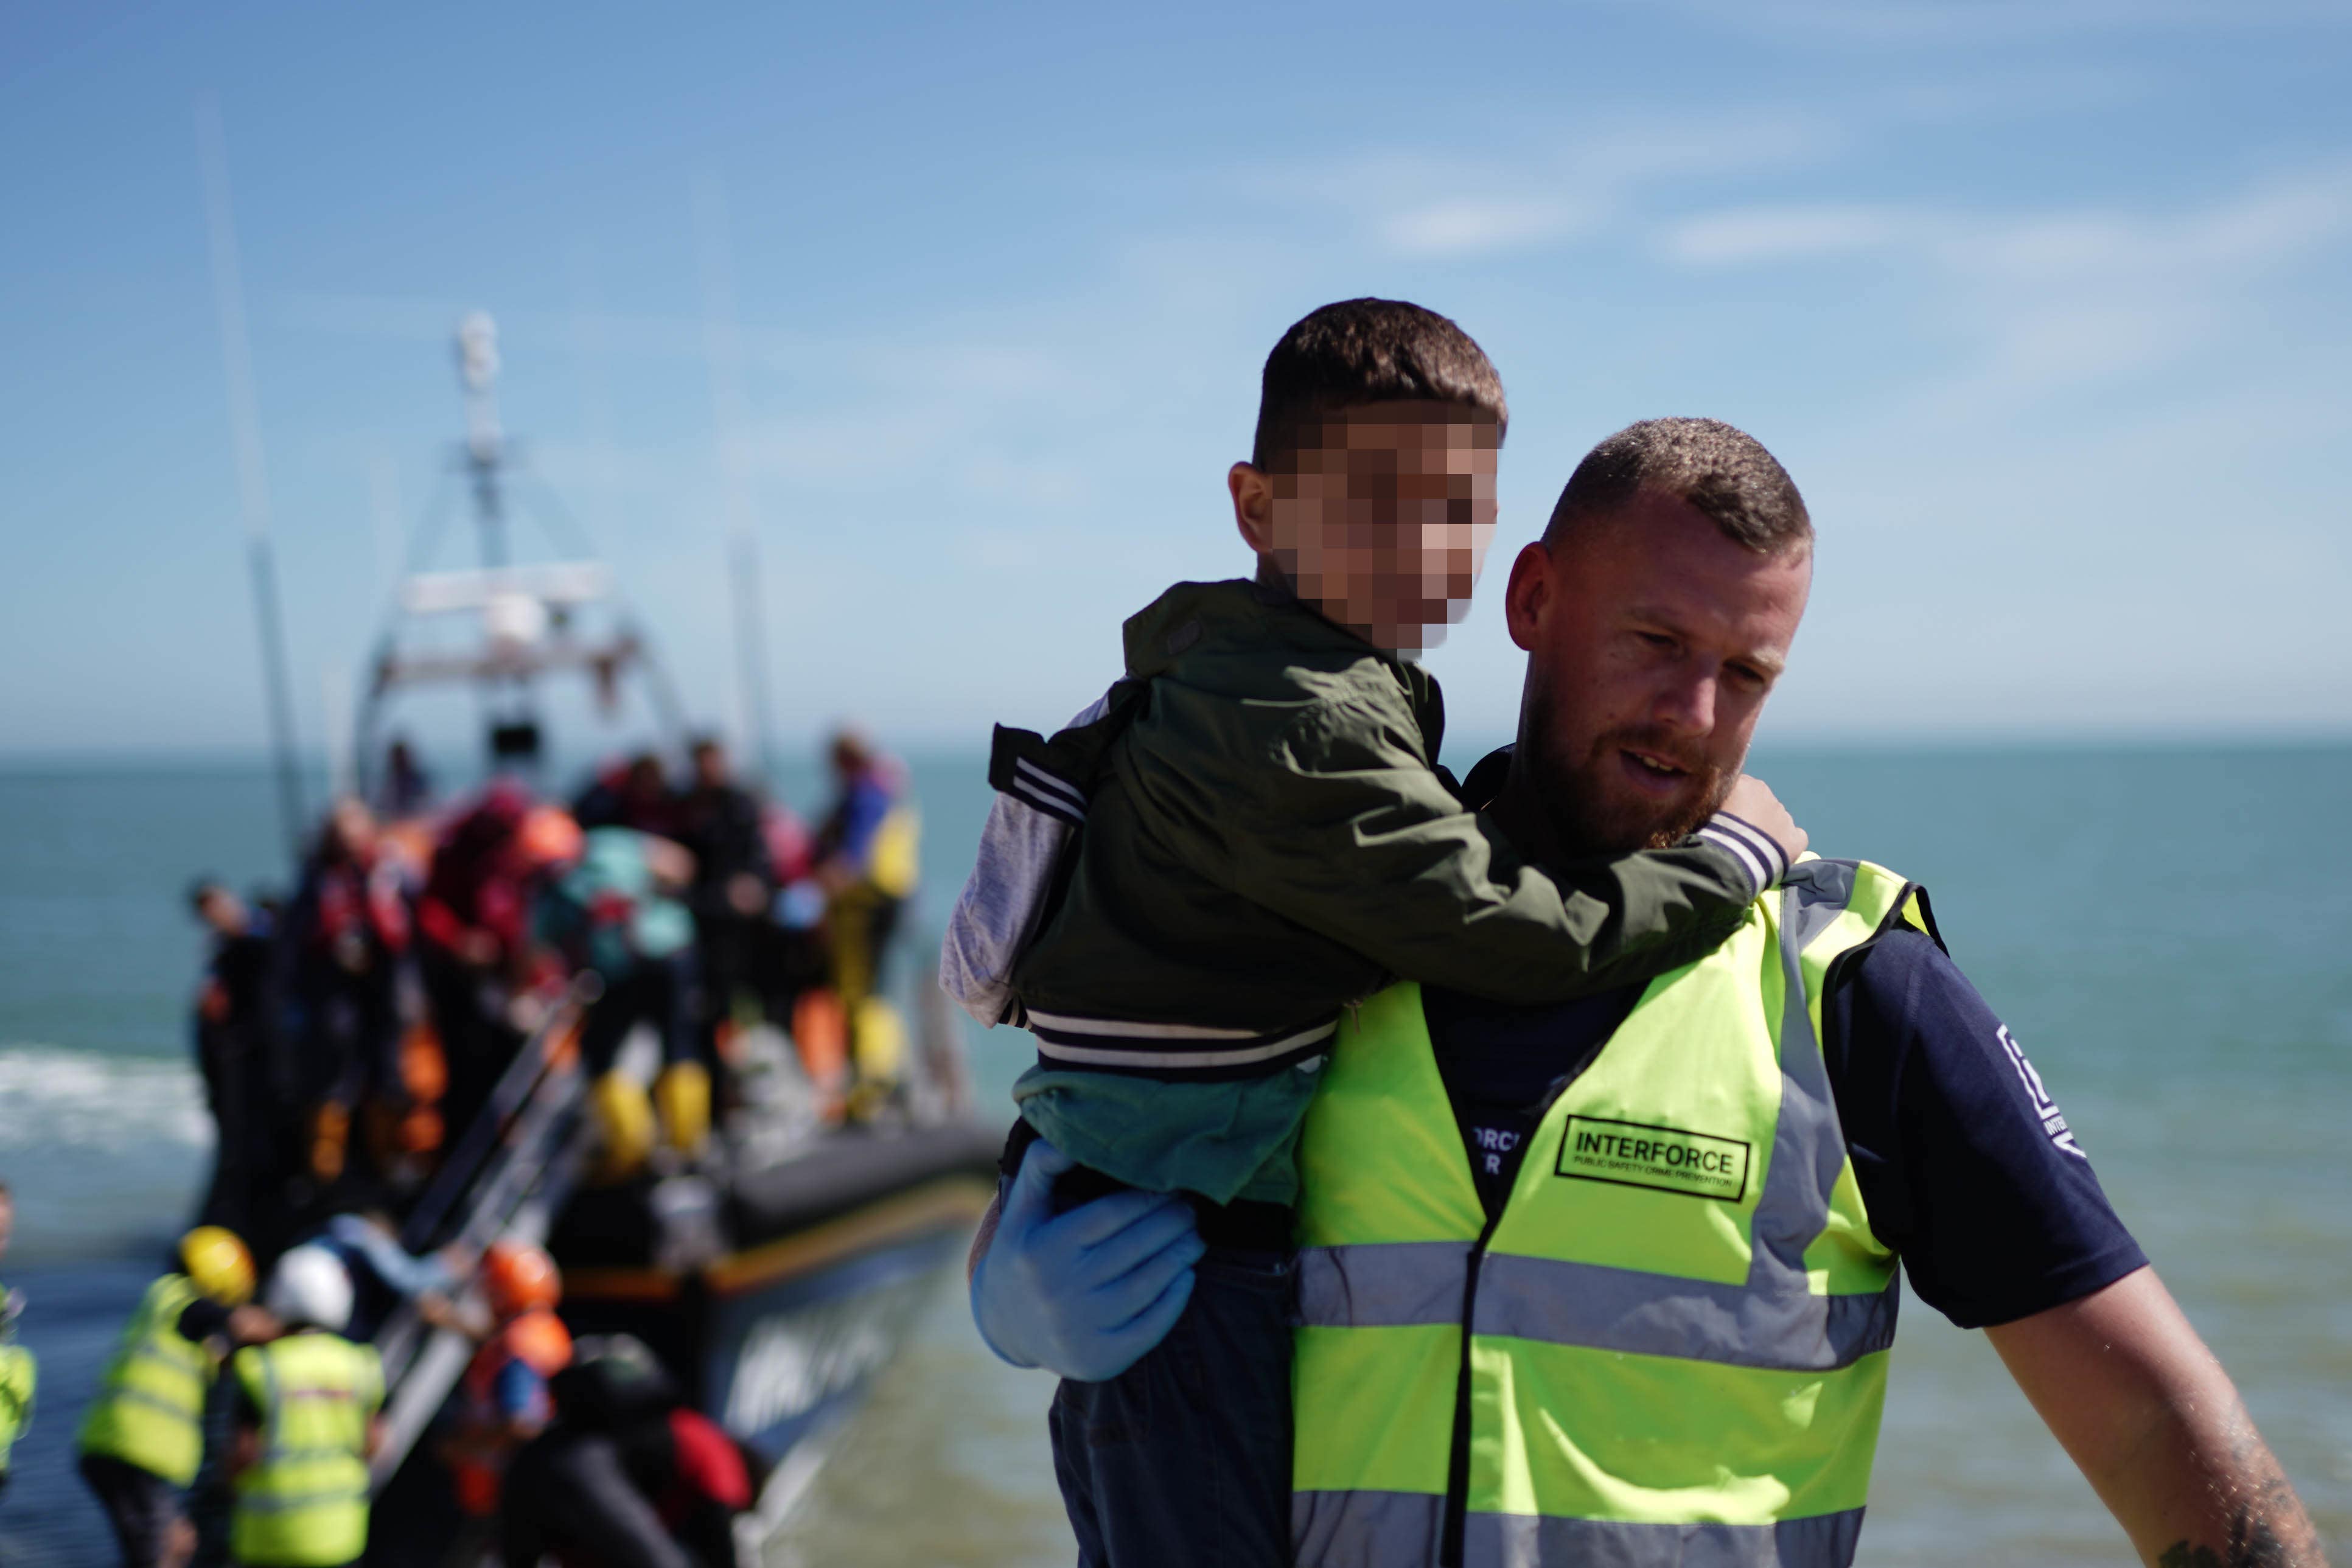 Migrant and refugee crossings of English Channel on the rise  DW   08062021